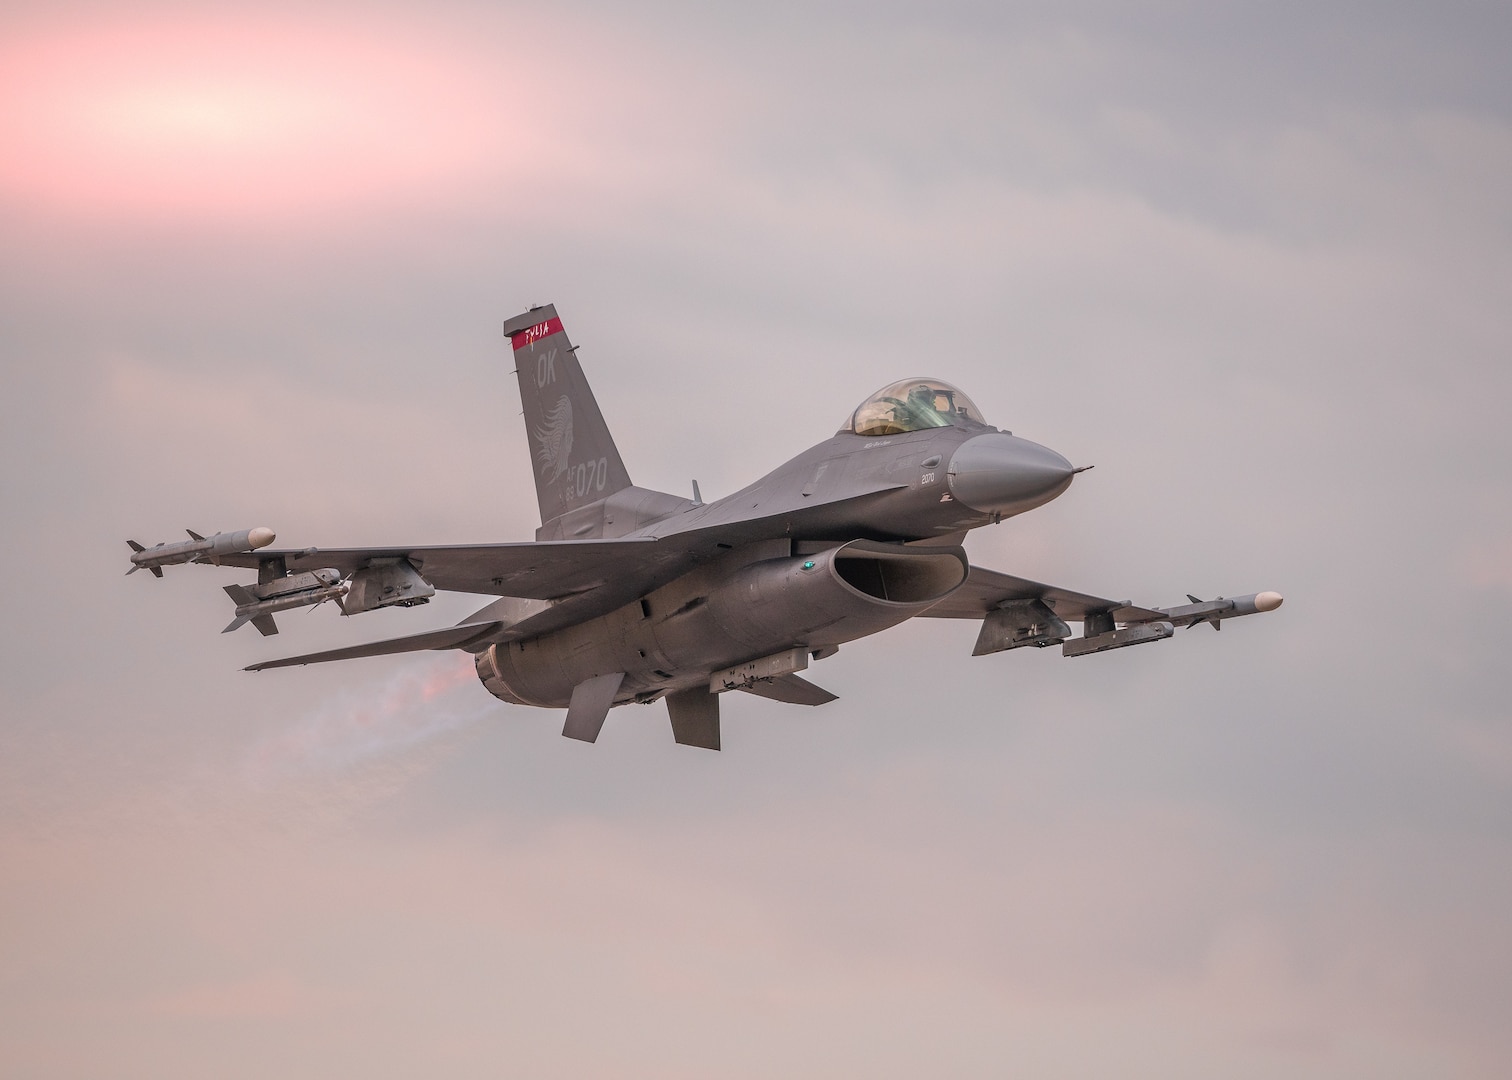 Lt. Col. David S. Gritsavage, F-16 pilot, 138th Fighter Wing, performs a flyby during his 5,000th hour of flight time in an F-16, Sept. 21, 2021, at Tulsa Air National Guard Base, Okla. Gritsavage is one of few pilots to accomplish this feat in an F-16, and the first to cross that threshold at the 138th Fighter Wing.

(Oklahoma Air National Guard photo by Master Sgt. C.T. Michael)